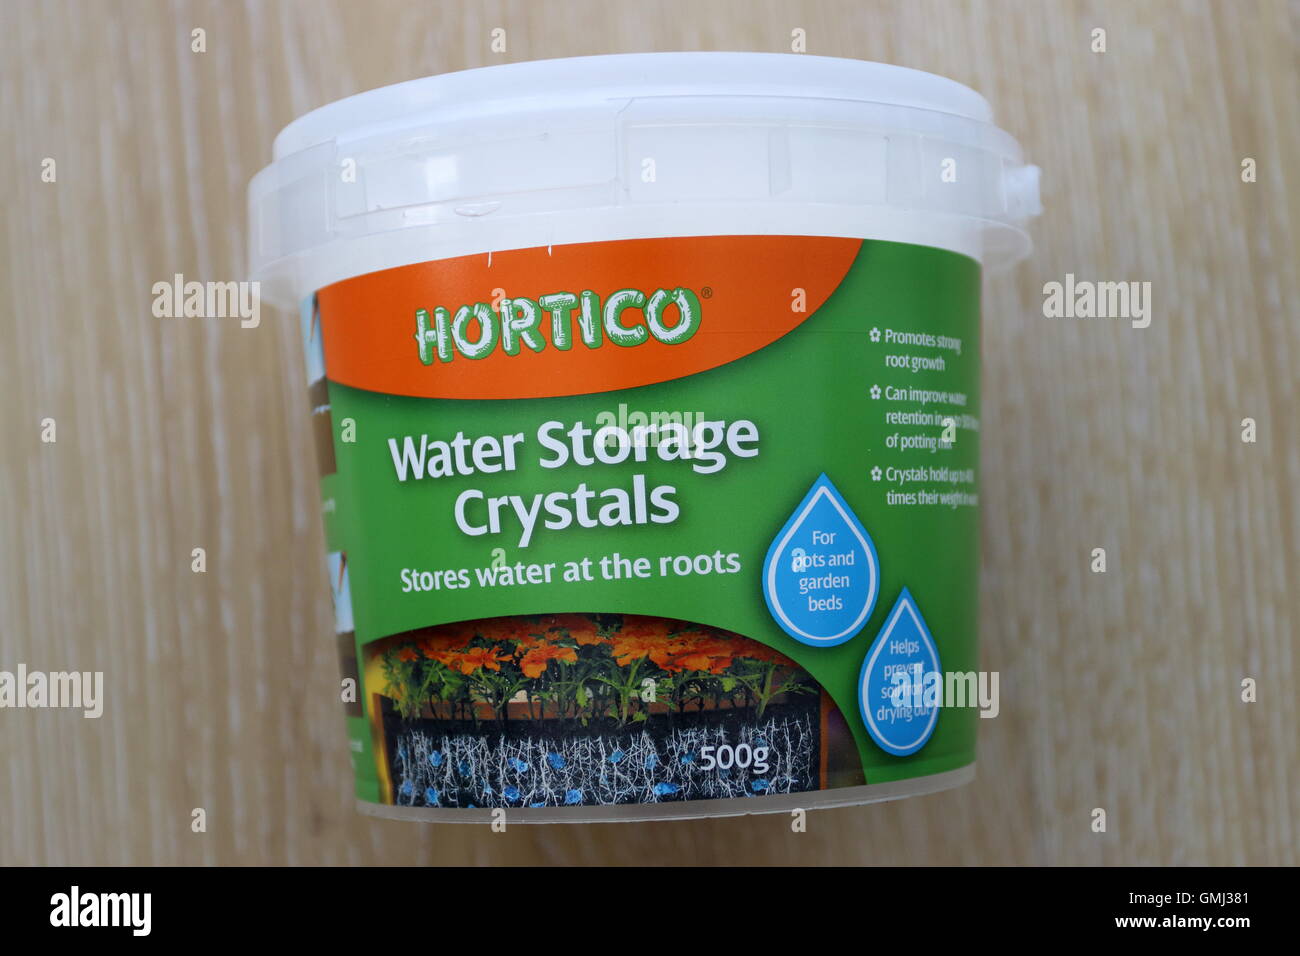 Hortico Water Storage Crystals on wooden background Stock Photo